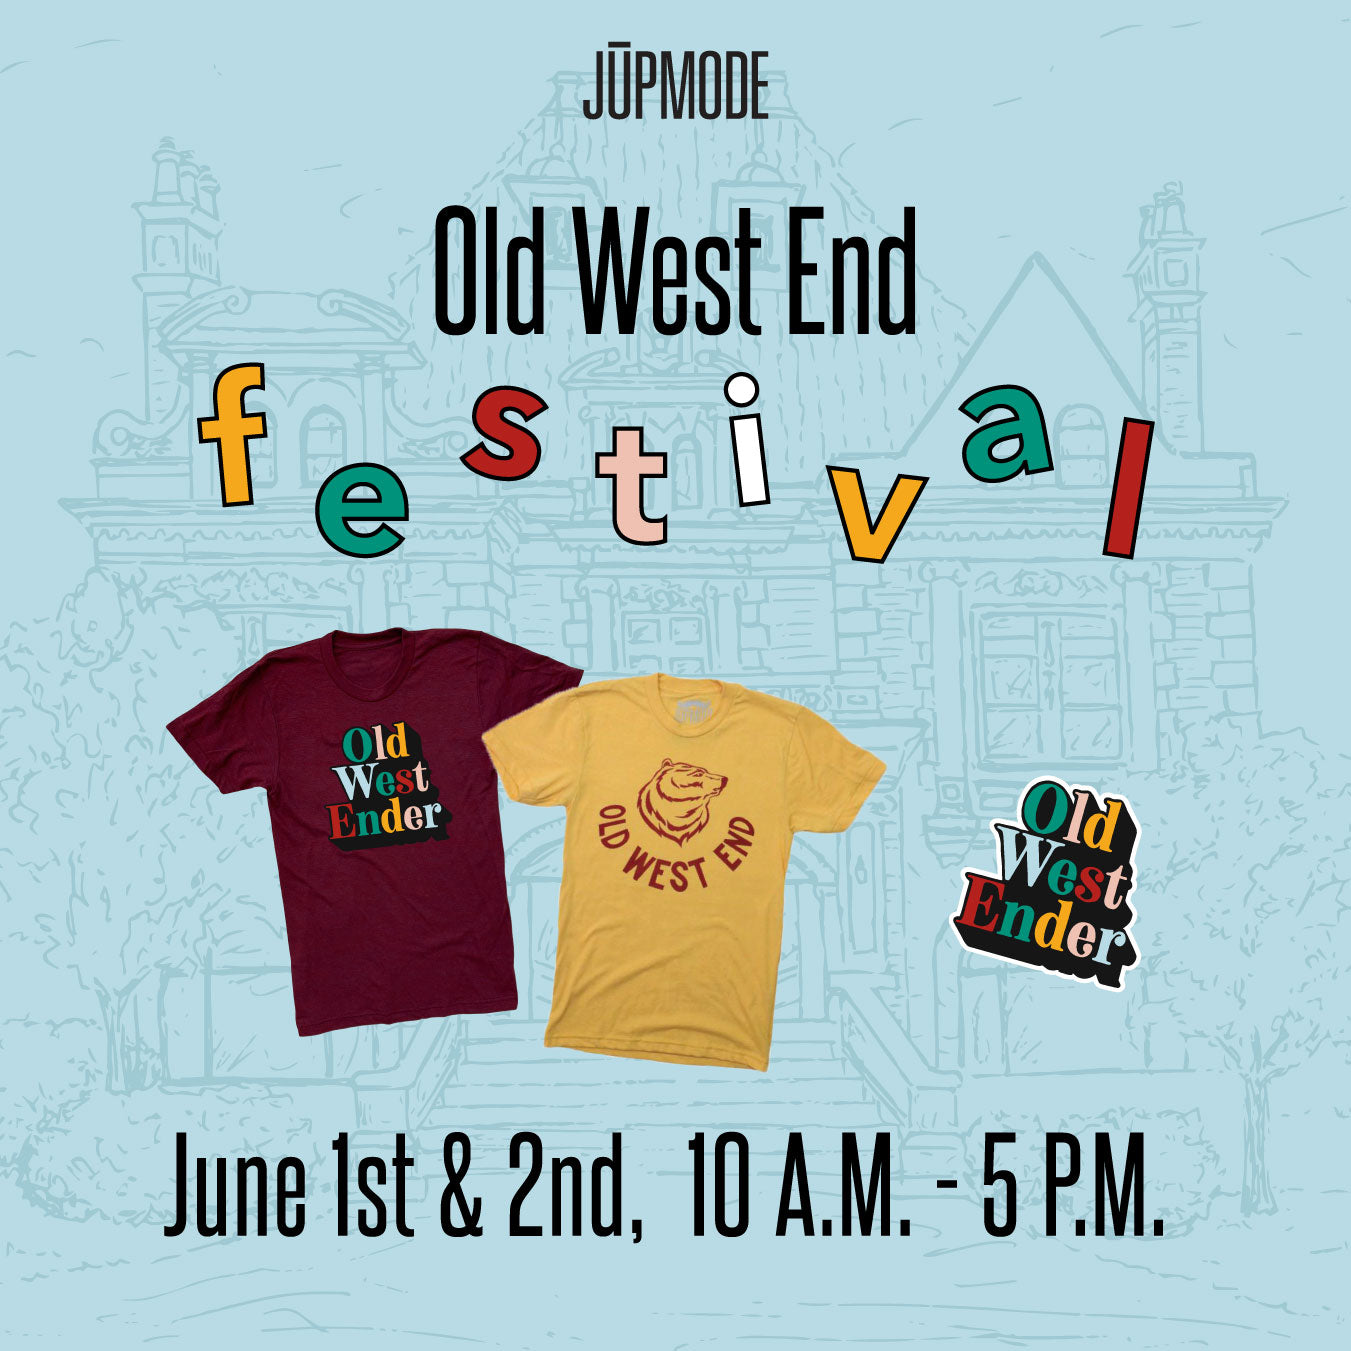 The Historic Old West End Festival — Jupmode